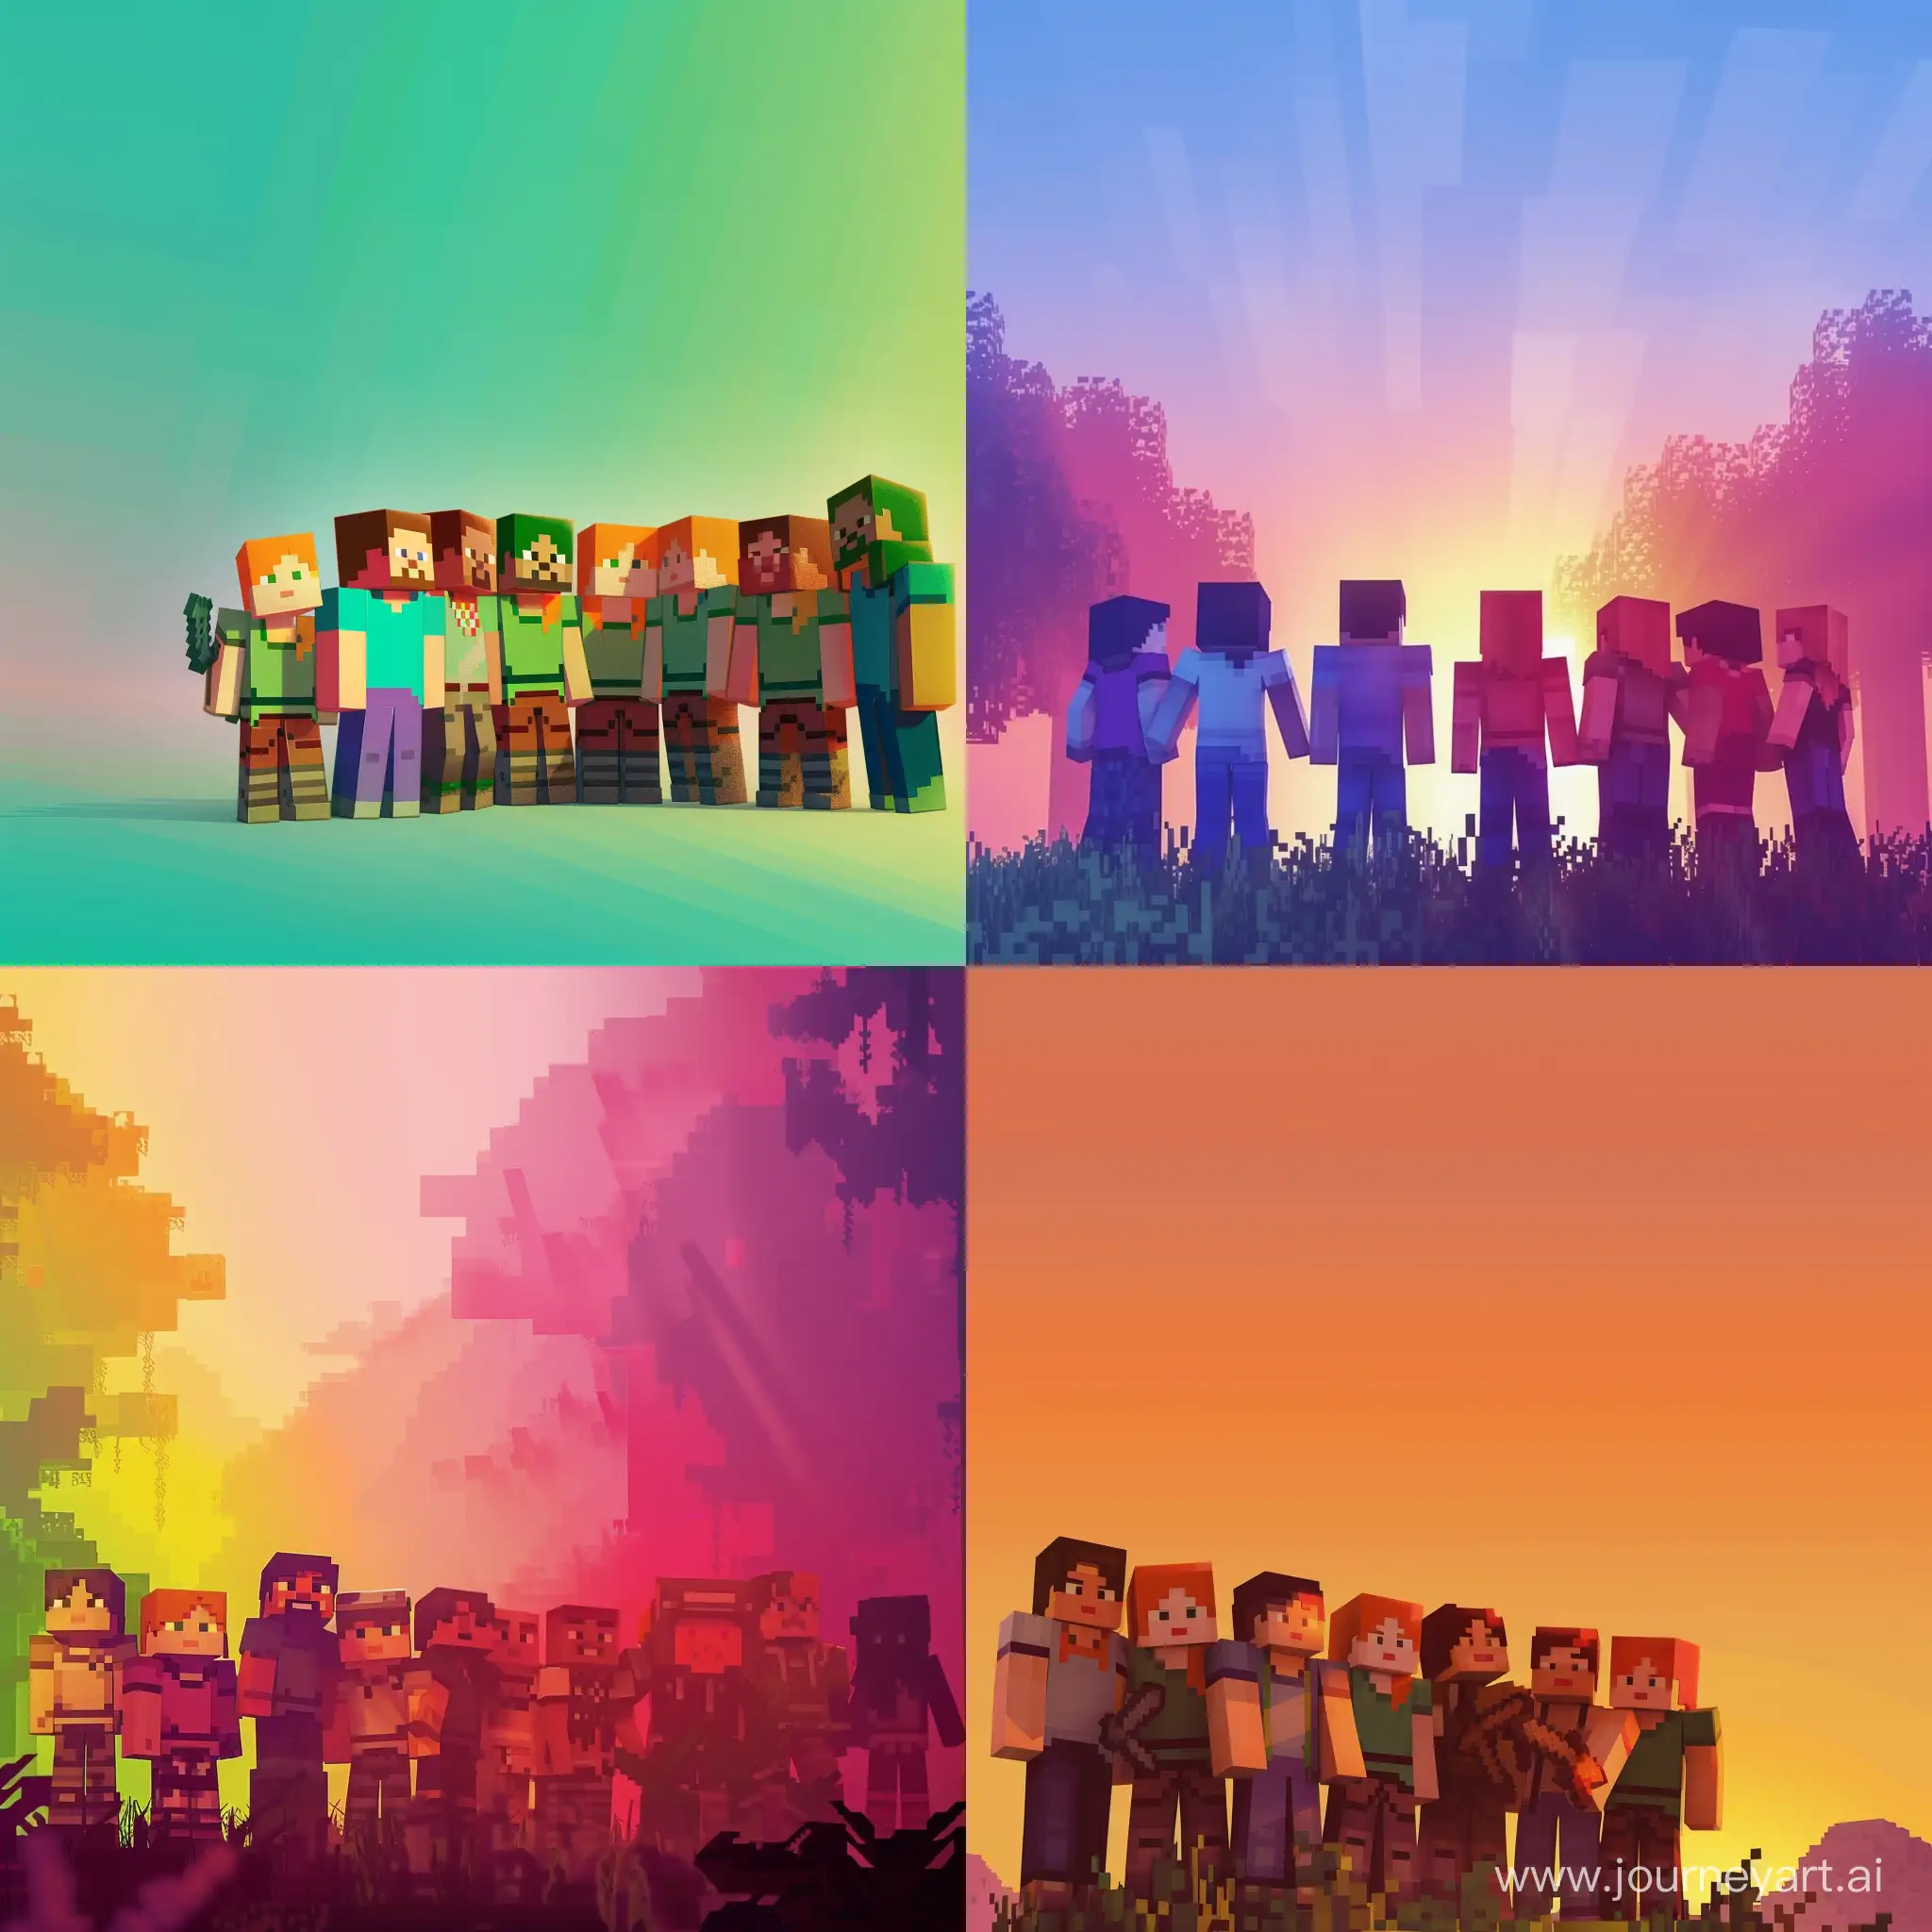 Banner for group, minecraft thematic, nature tones gradient background, the group of friends standing in the left side.